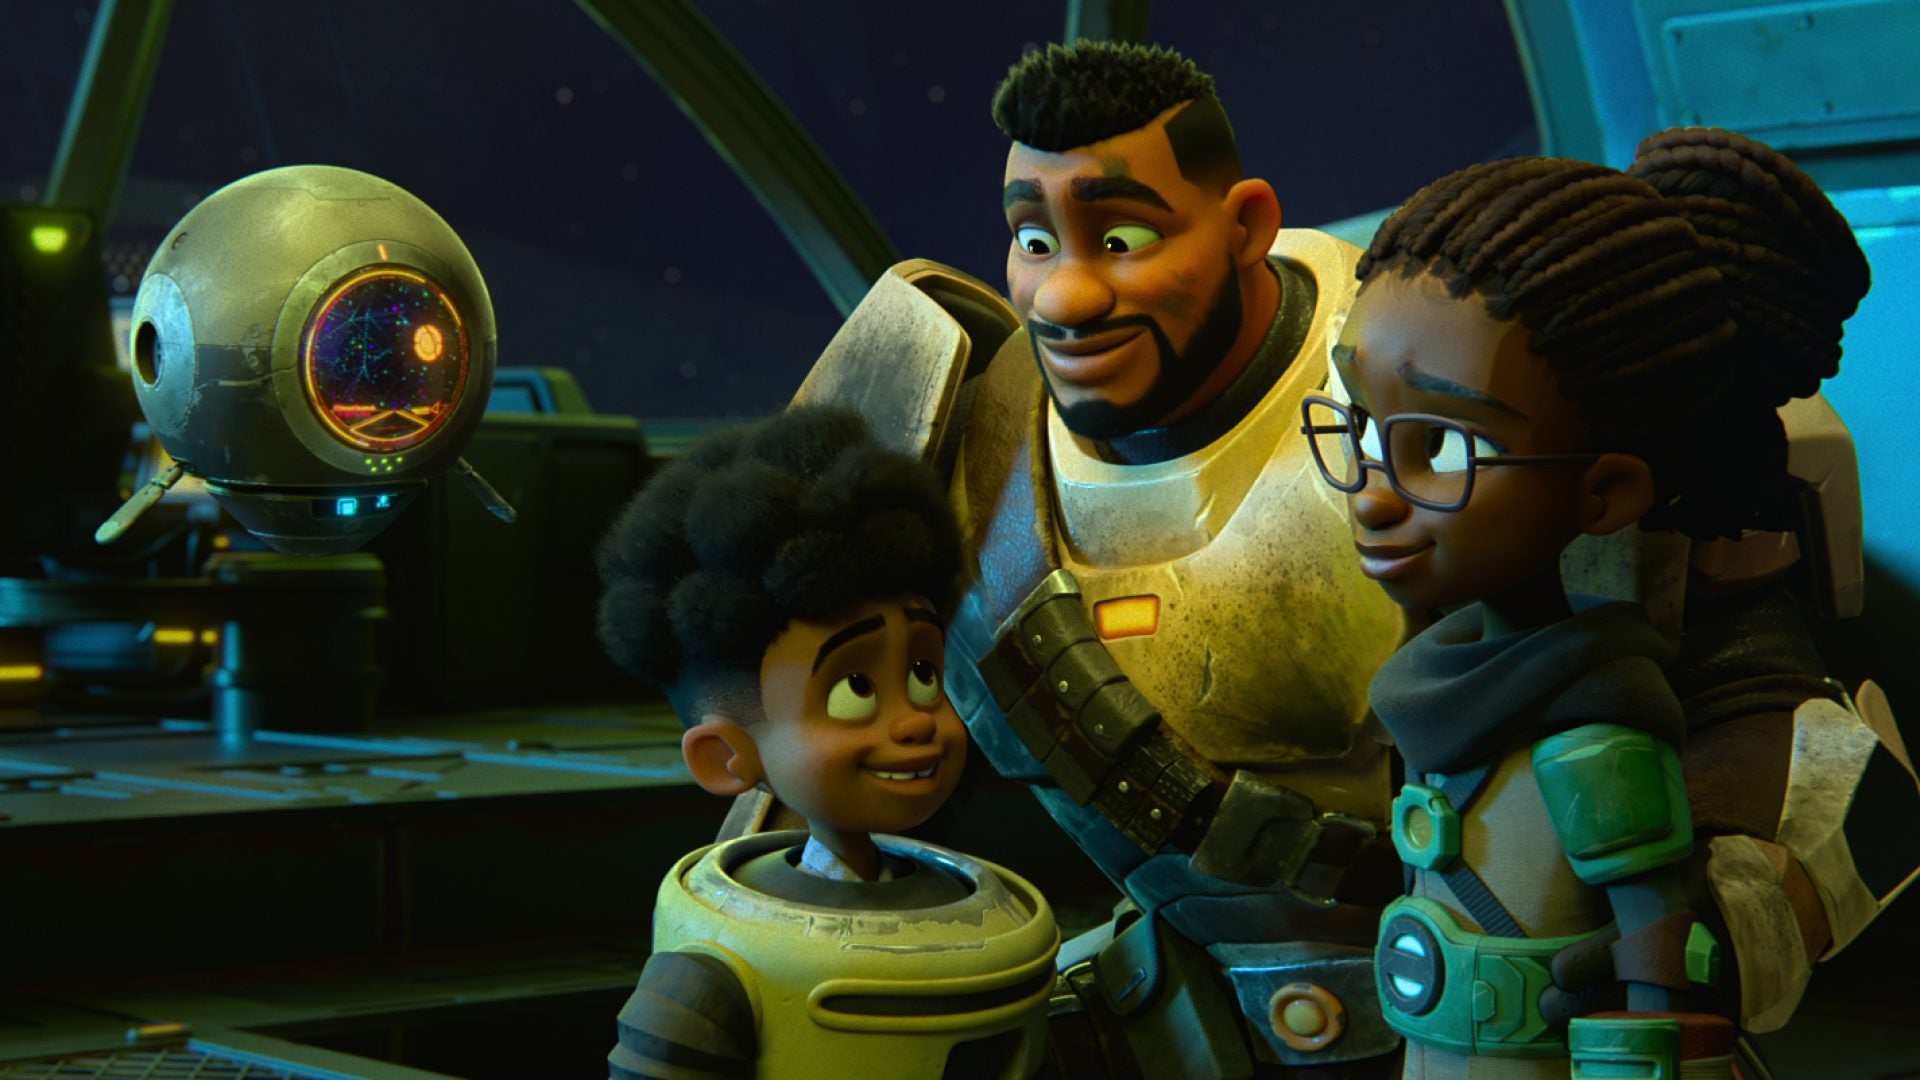 Netflix Releases Trailer For New Animated Series ‘My Dad the Bounty Hunter’